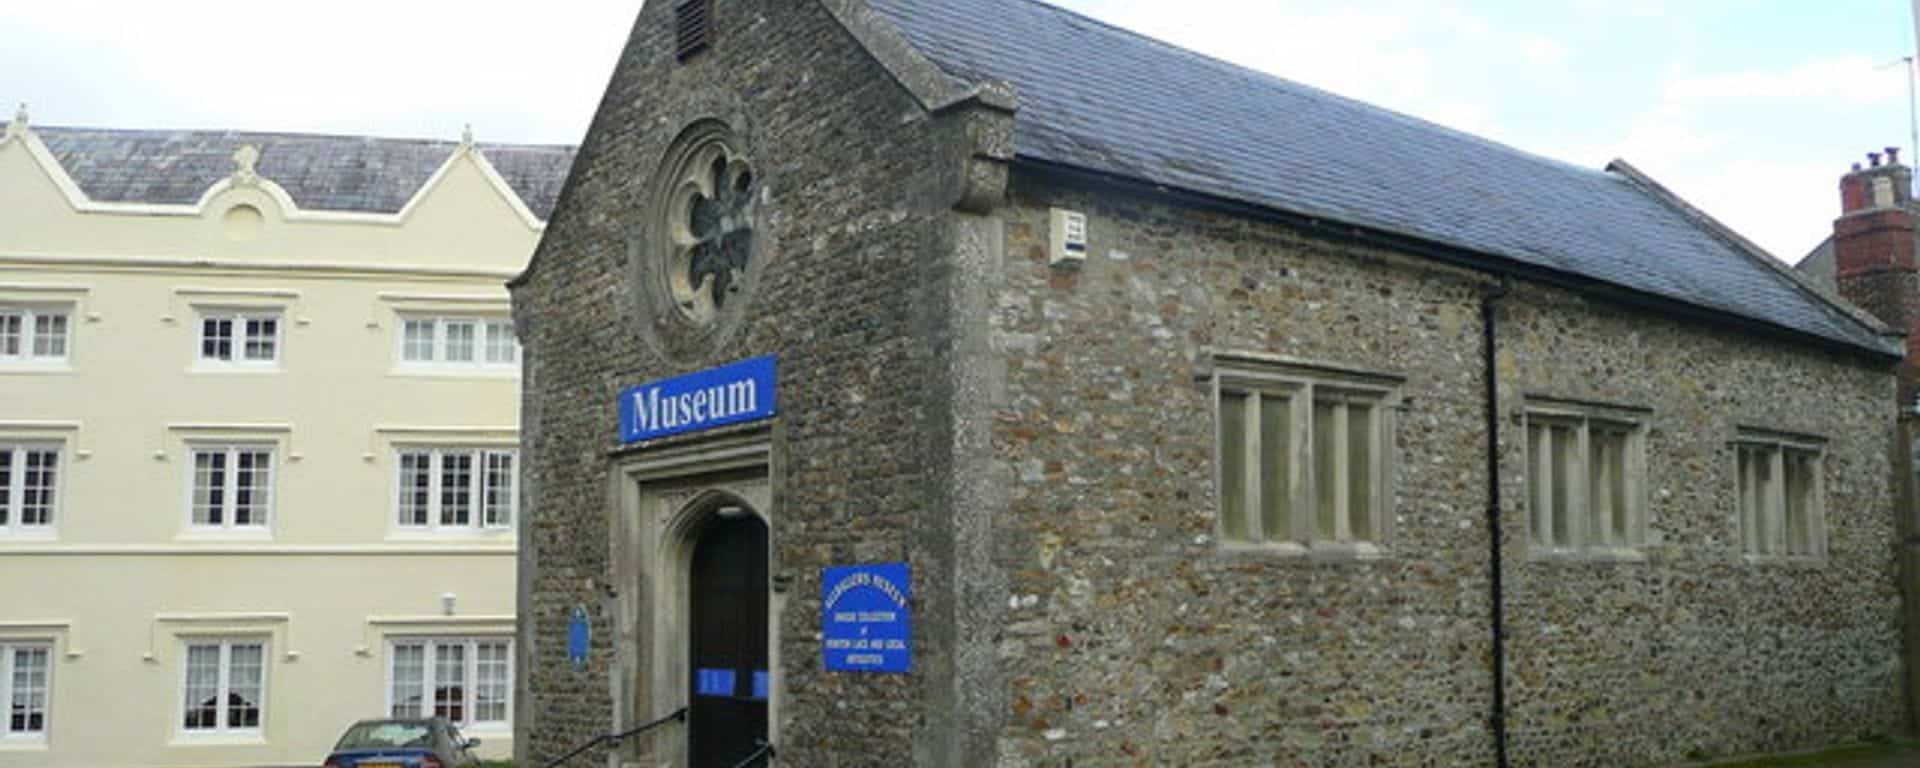 All Hallows Museum of Honiton in UK